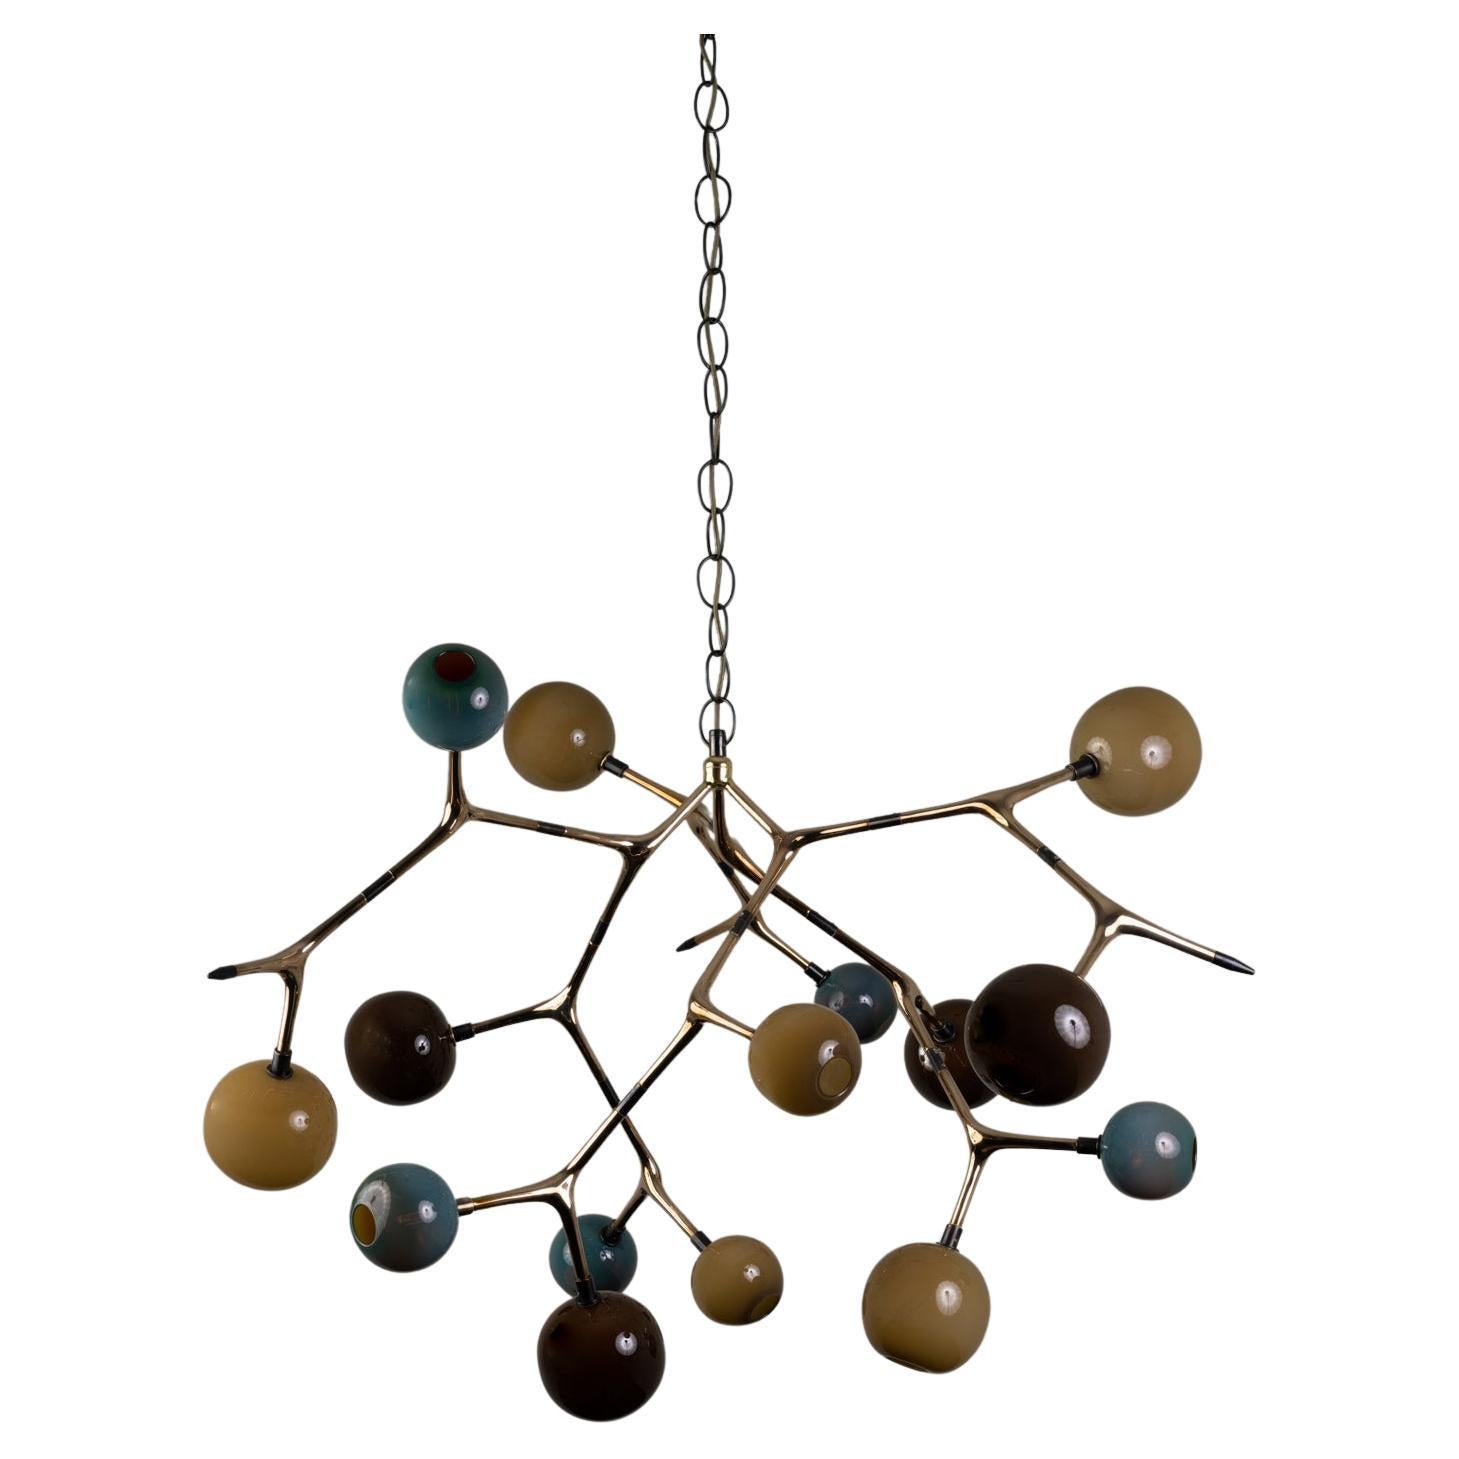 MARATUS 15 chandelier was designed for the Mol collection by Mexican artist Isabel Moncada.

The image of a swarm of small lights at night is mesmerizing. Maratus 15 is a very dramatic piece, ideal for a lobby or double-height space. It uses a